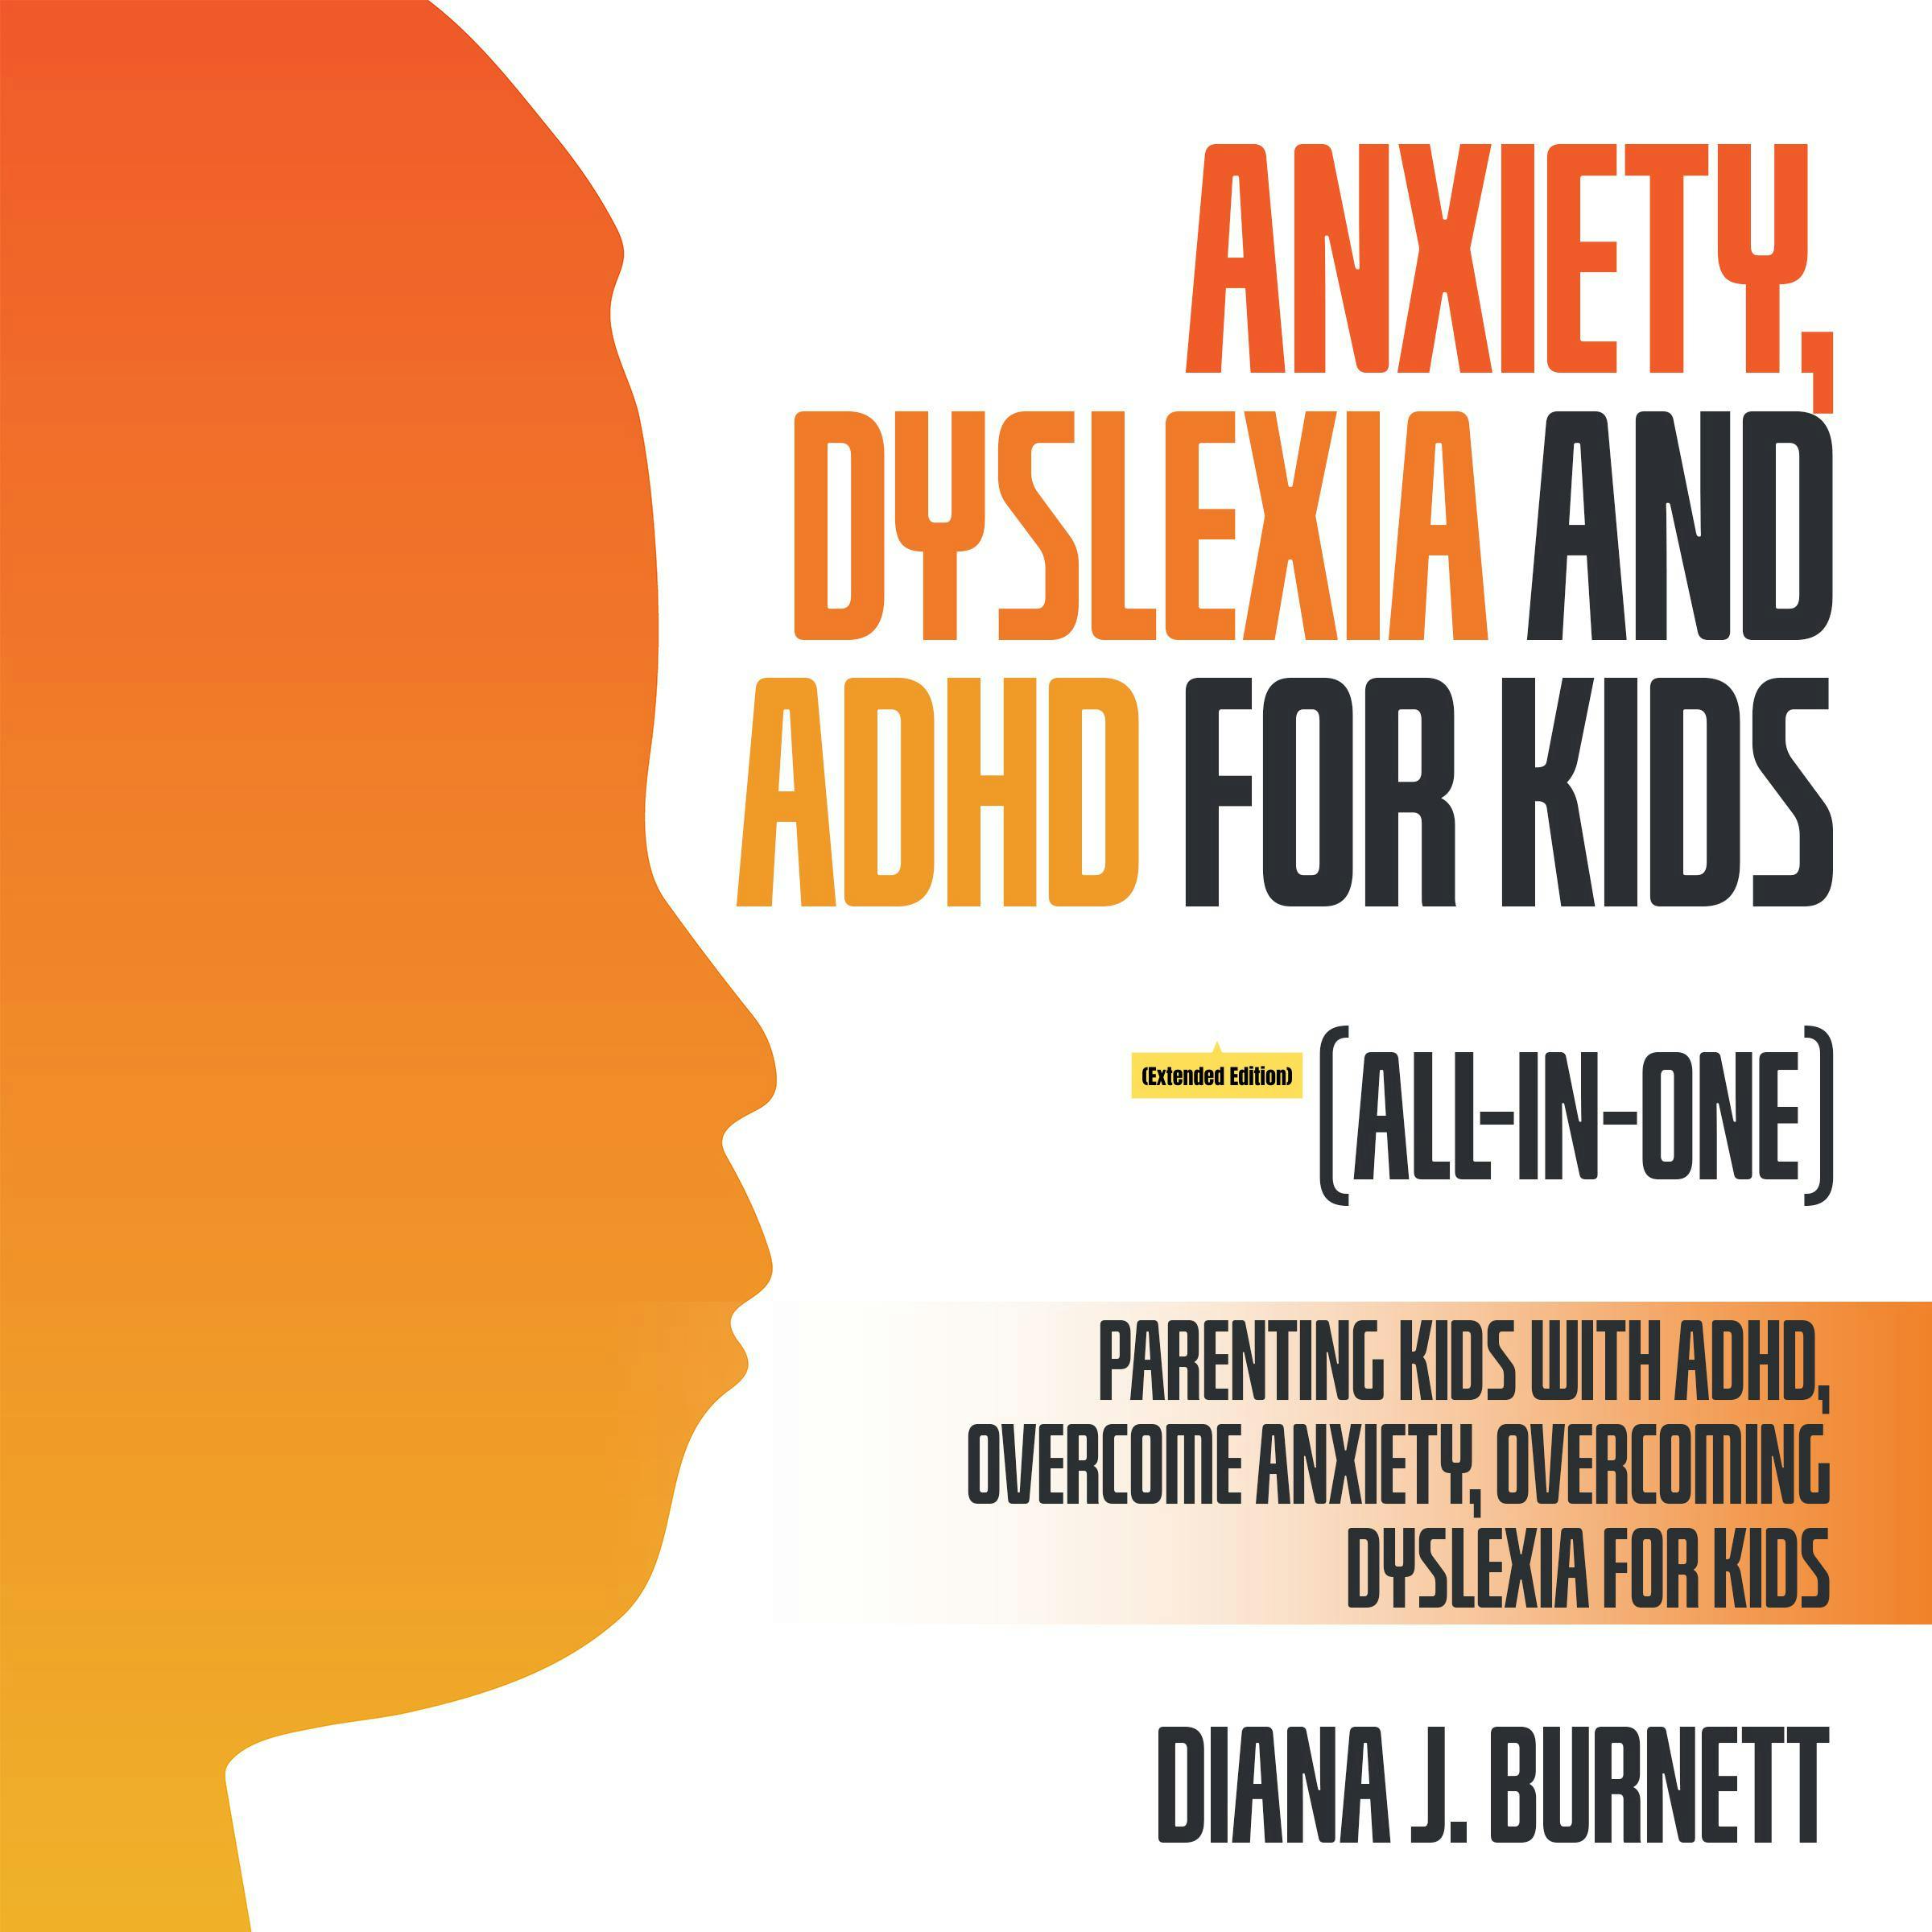 Anxiety, Dyslexia and ADHD for Kids (All-in-One) (Extended Edition): Parenting Kids with ADHD, Overcome Anxiety, Overcoming Dyslexia for Kids - undefined